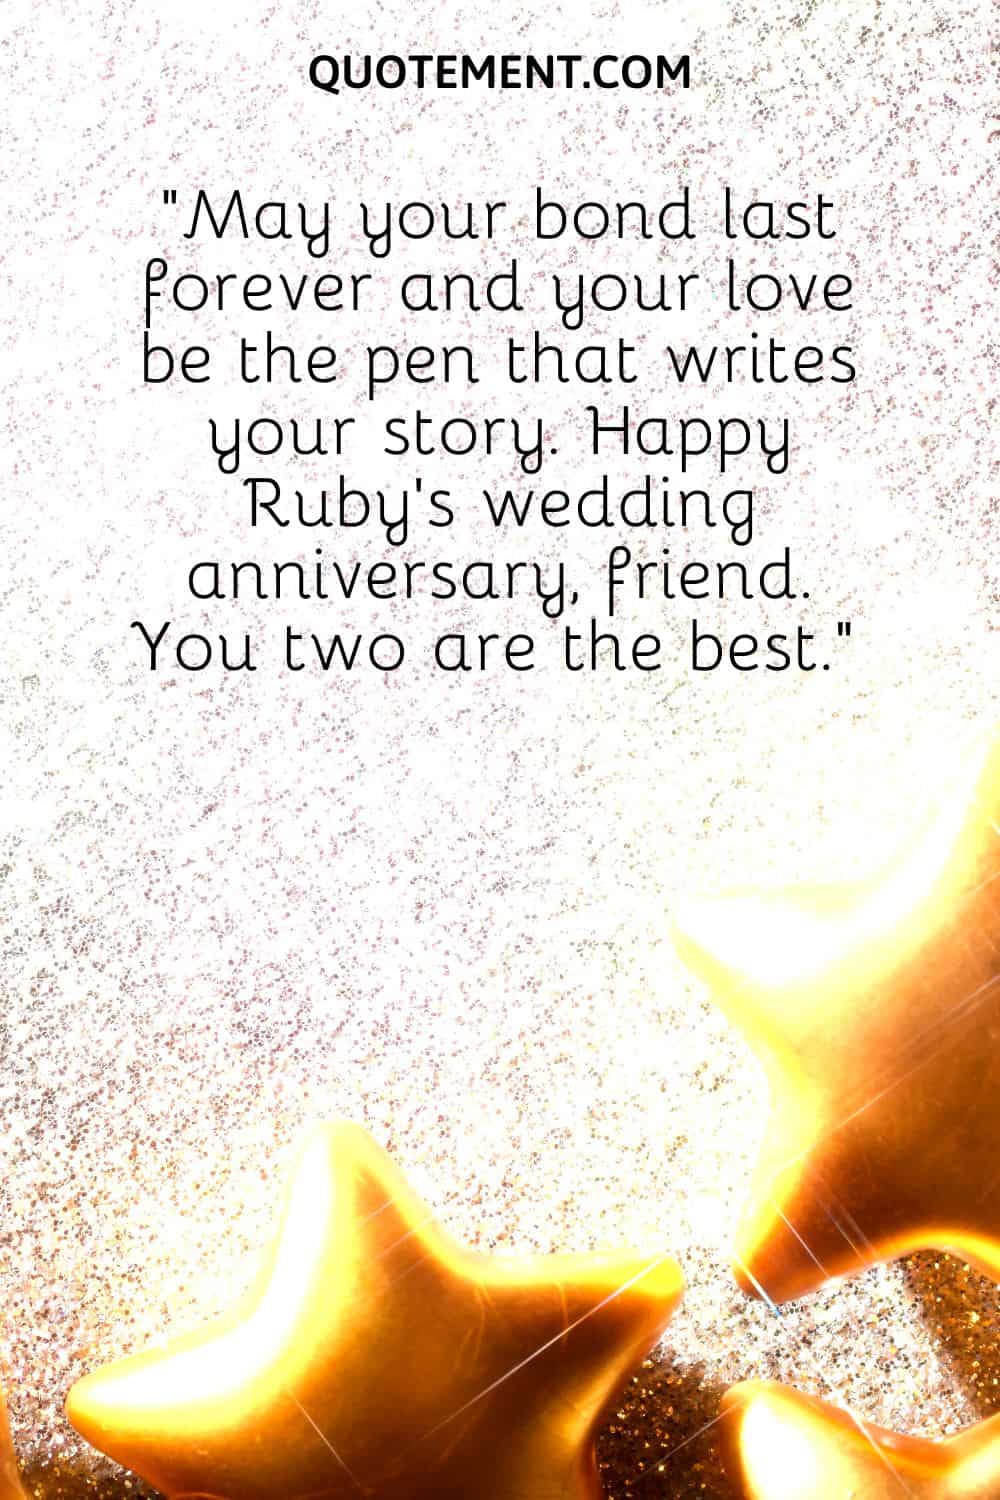 May your bond last forever and your love be the pen that writes your story